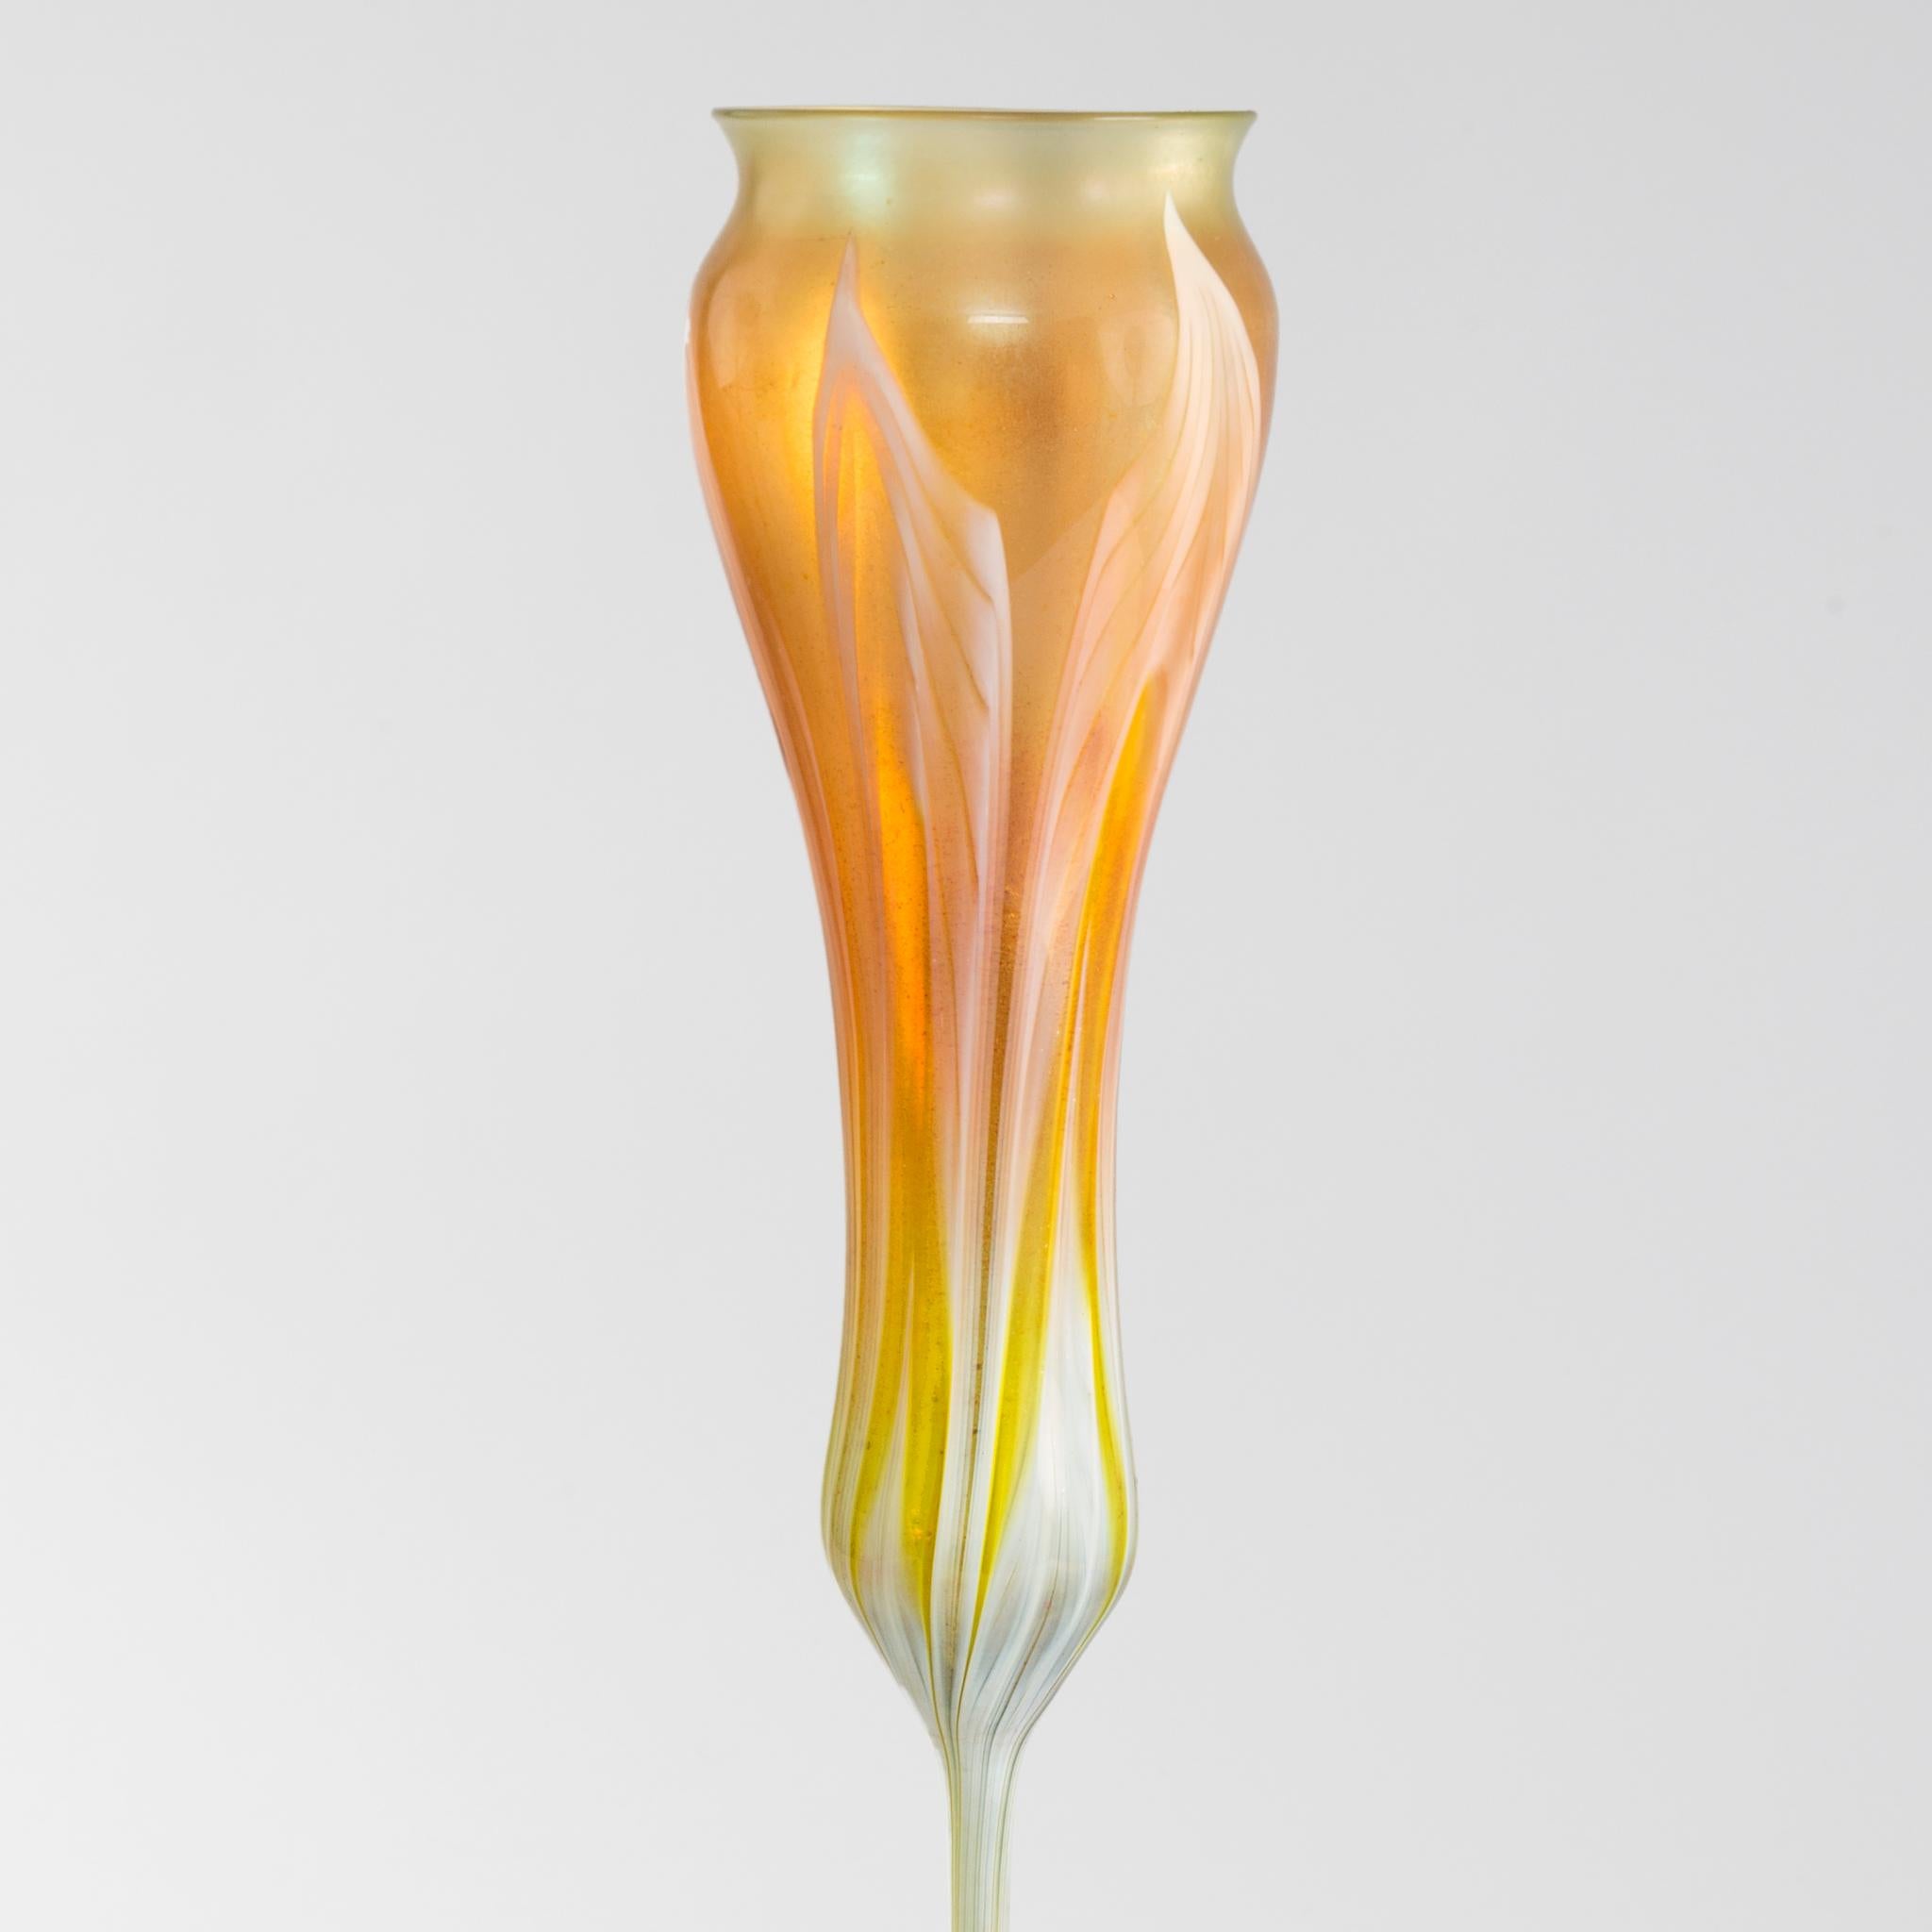 This Favrile glass flower form vase, by Tiffany Studios New York, is meant to suggest the calyx forms, open or closed, of crocus or tulip flowers. This richly-hued orange-yellow vase is tall and slender and colored with exquisite green and white